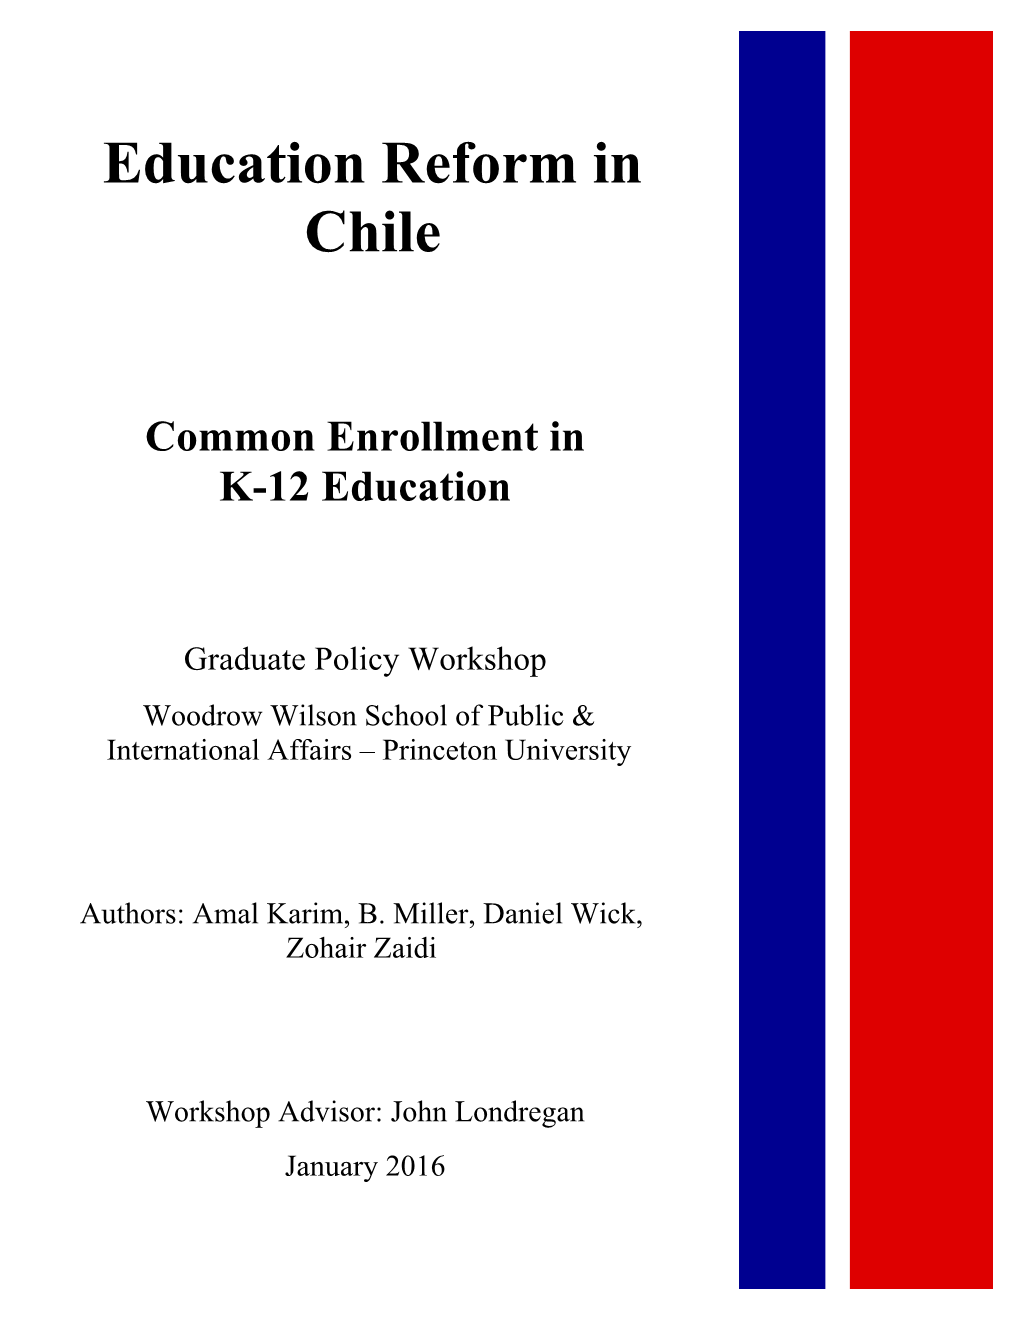 Education Reform in Chile